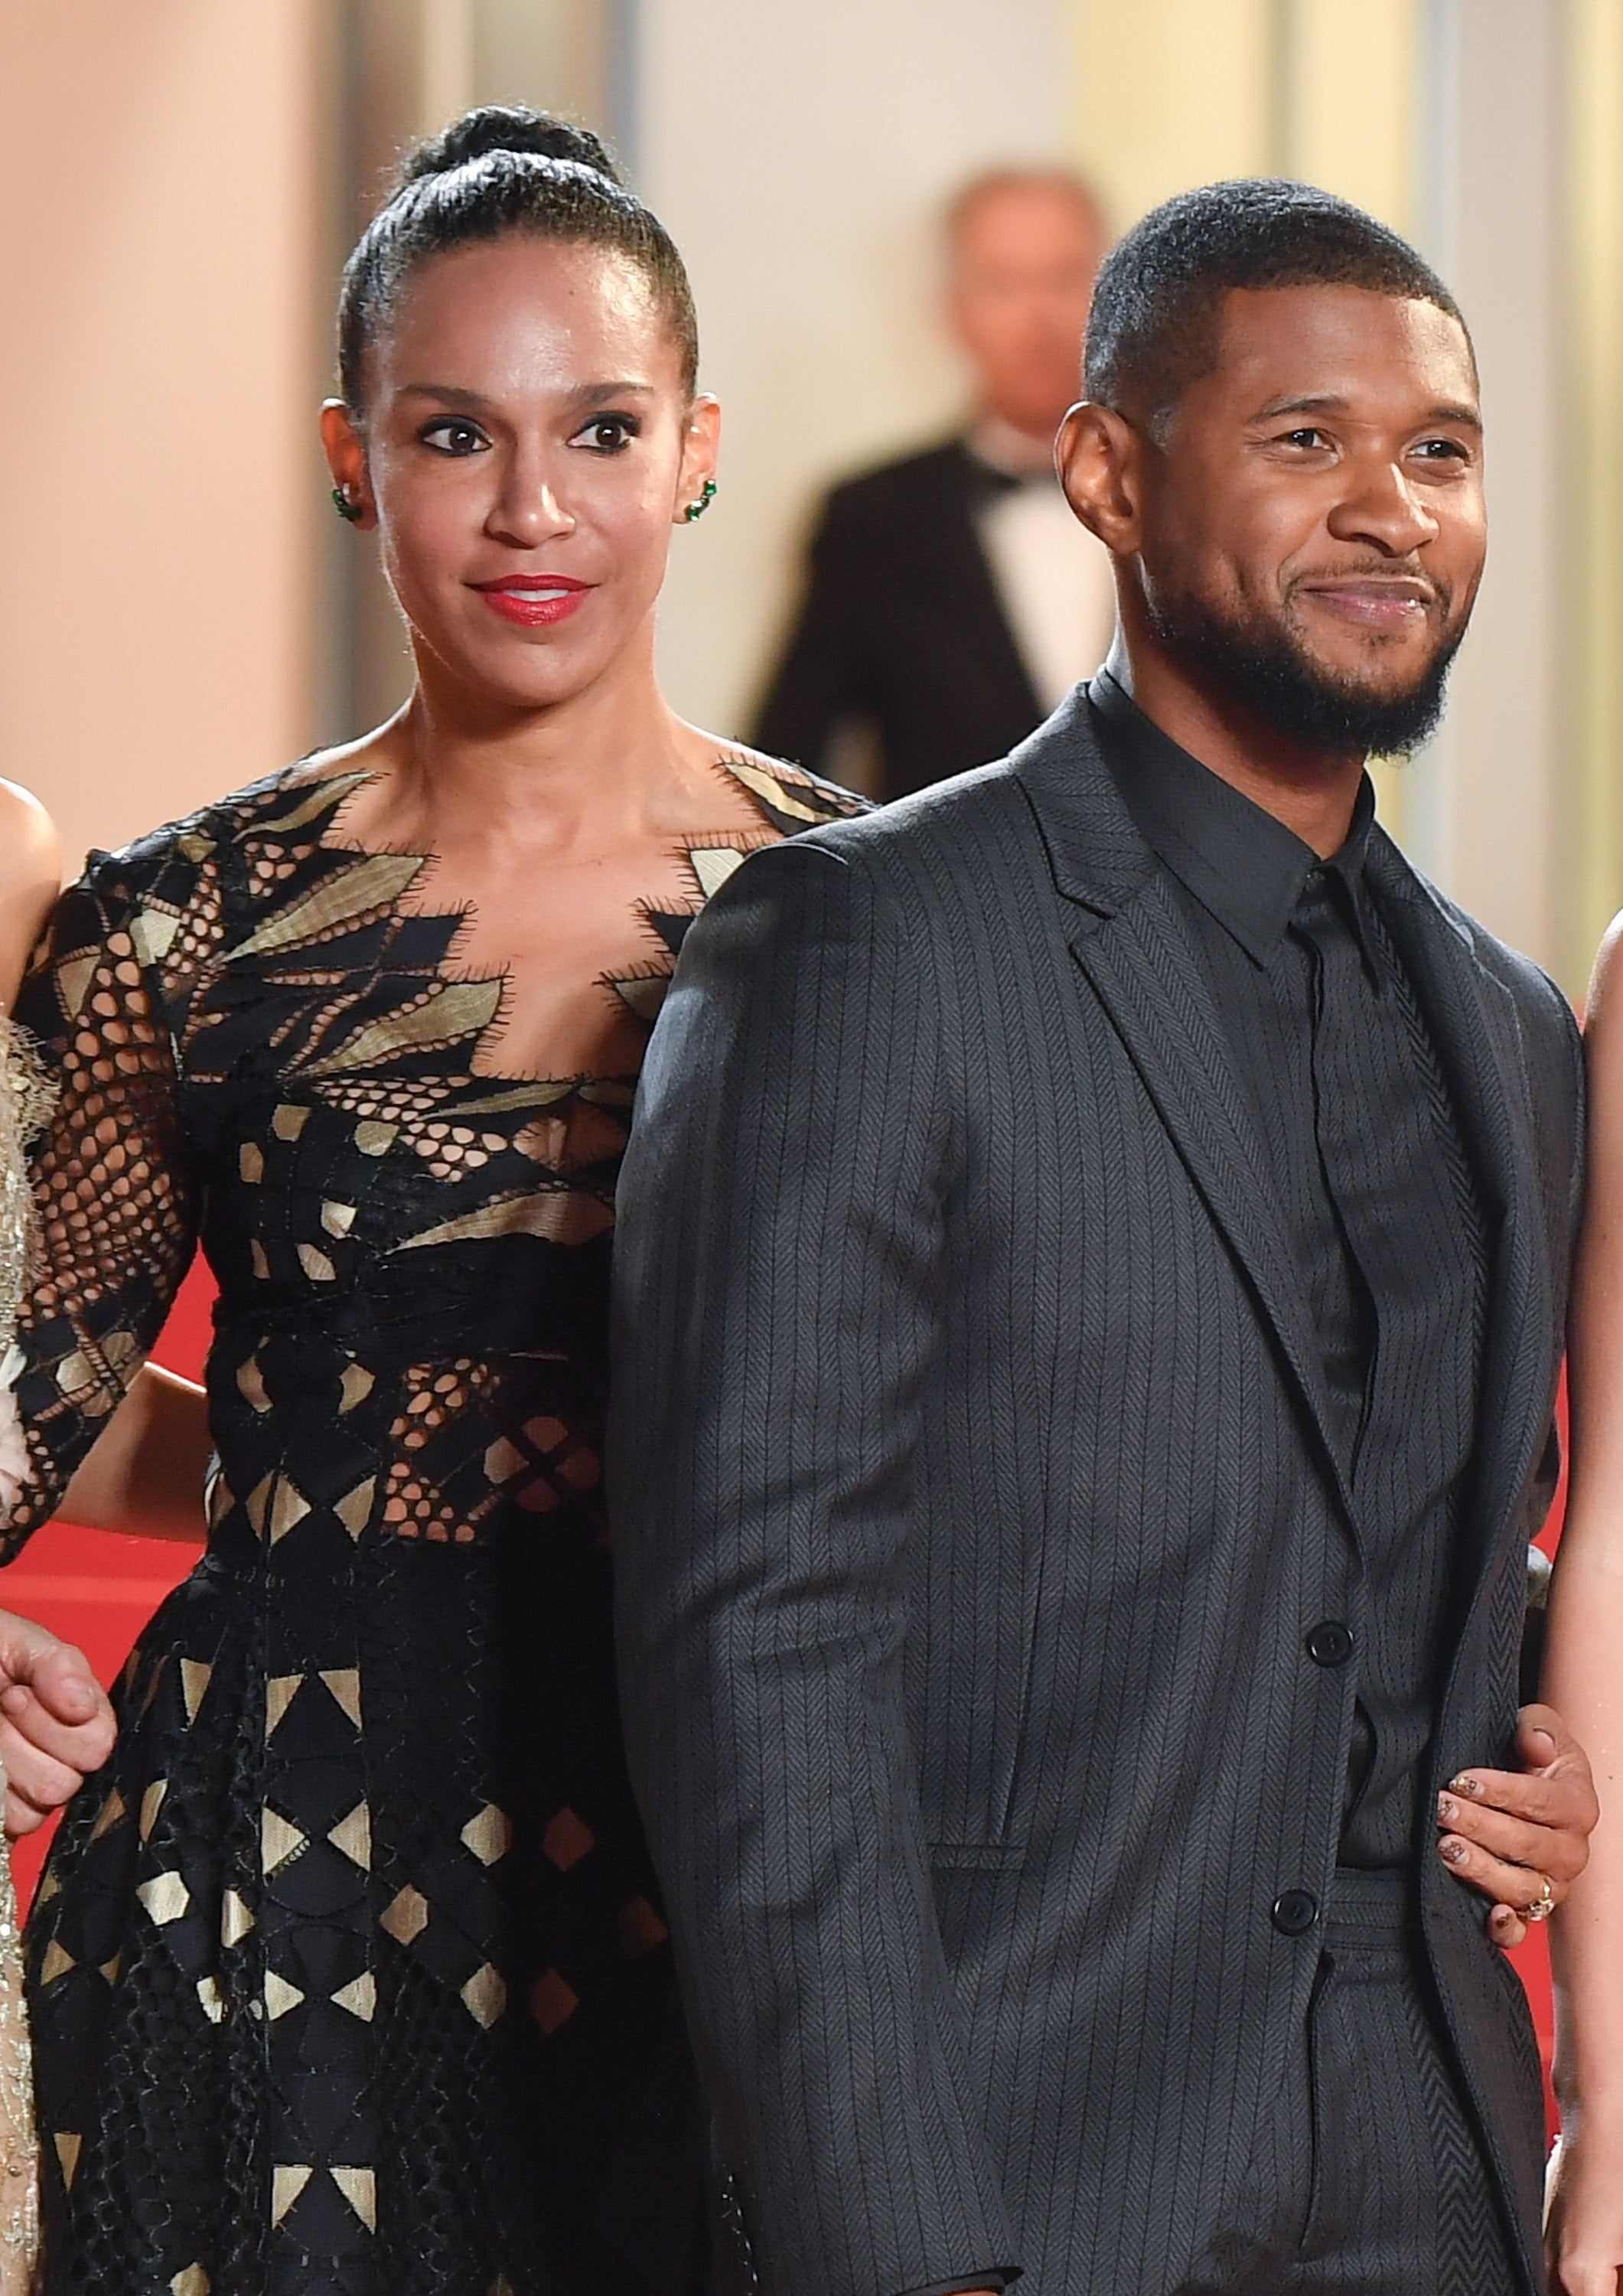 Usher Files For Divorce From Grace Miguel